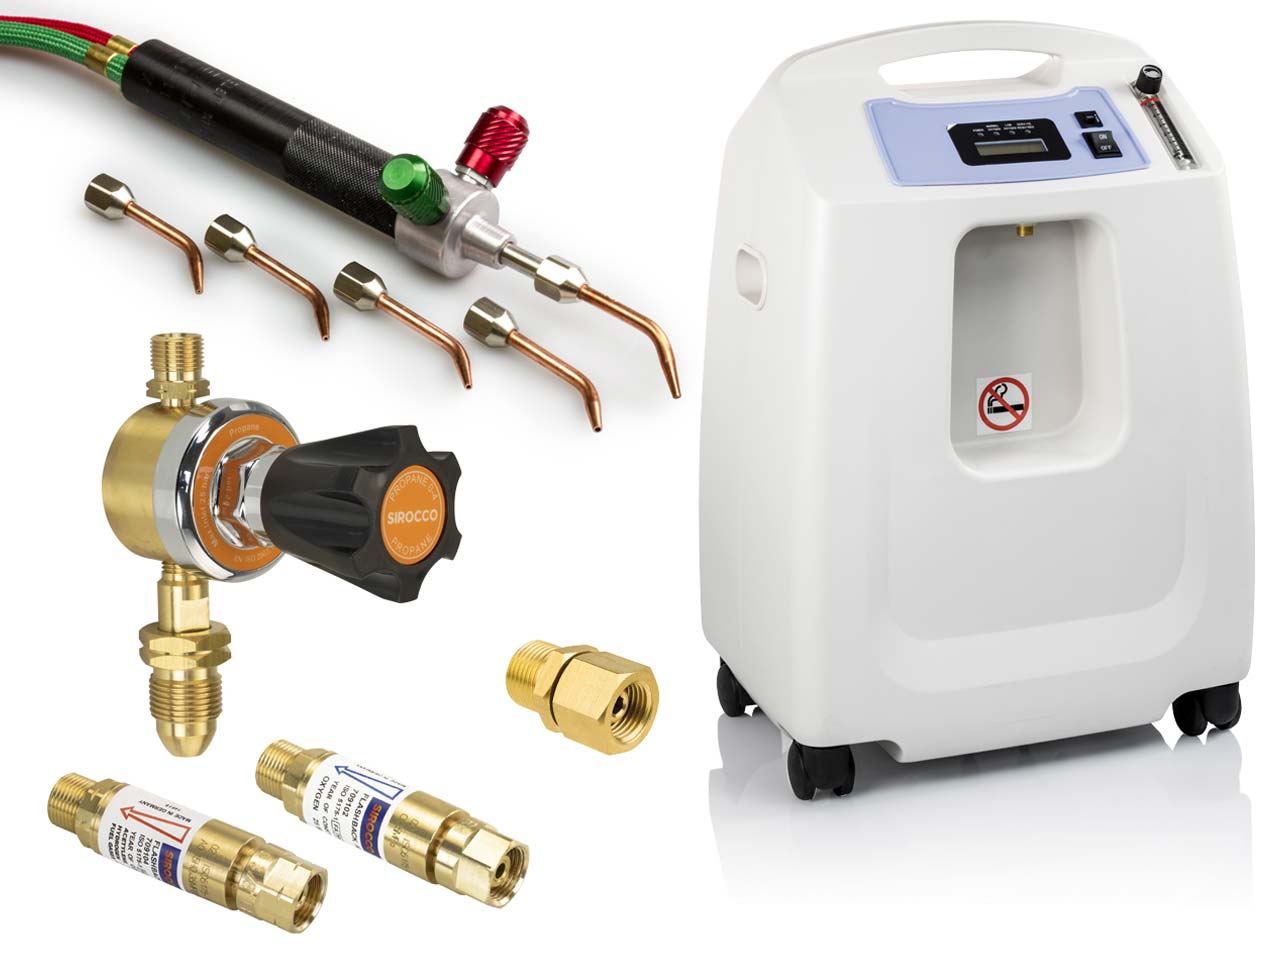 Soldering System With Oxygen Concentrator Questions & Answers